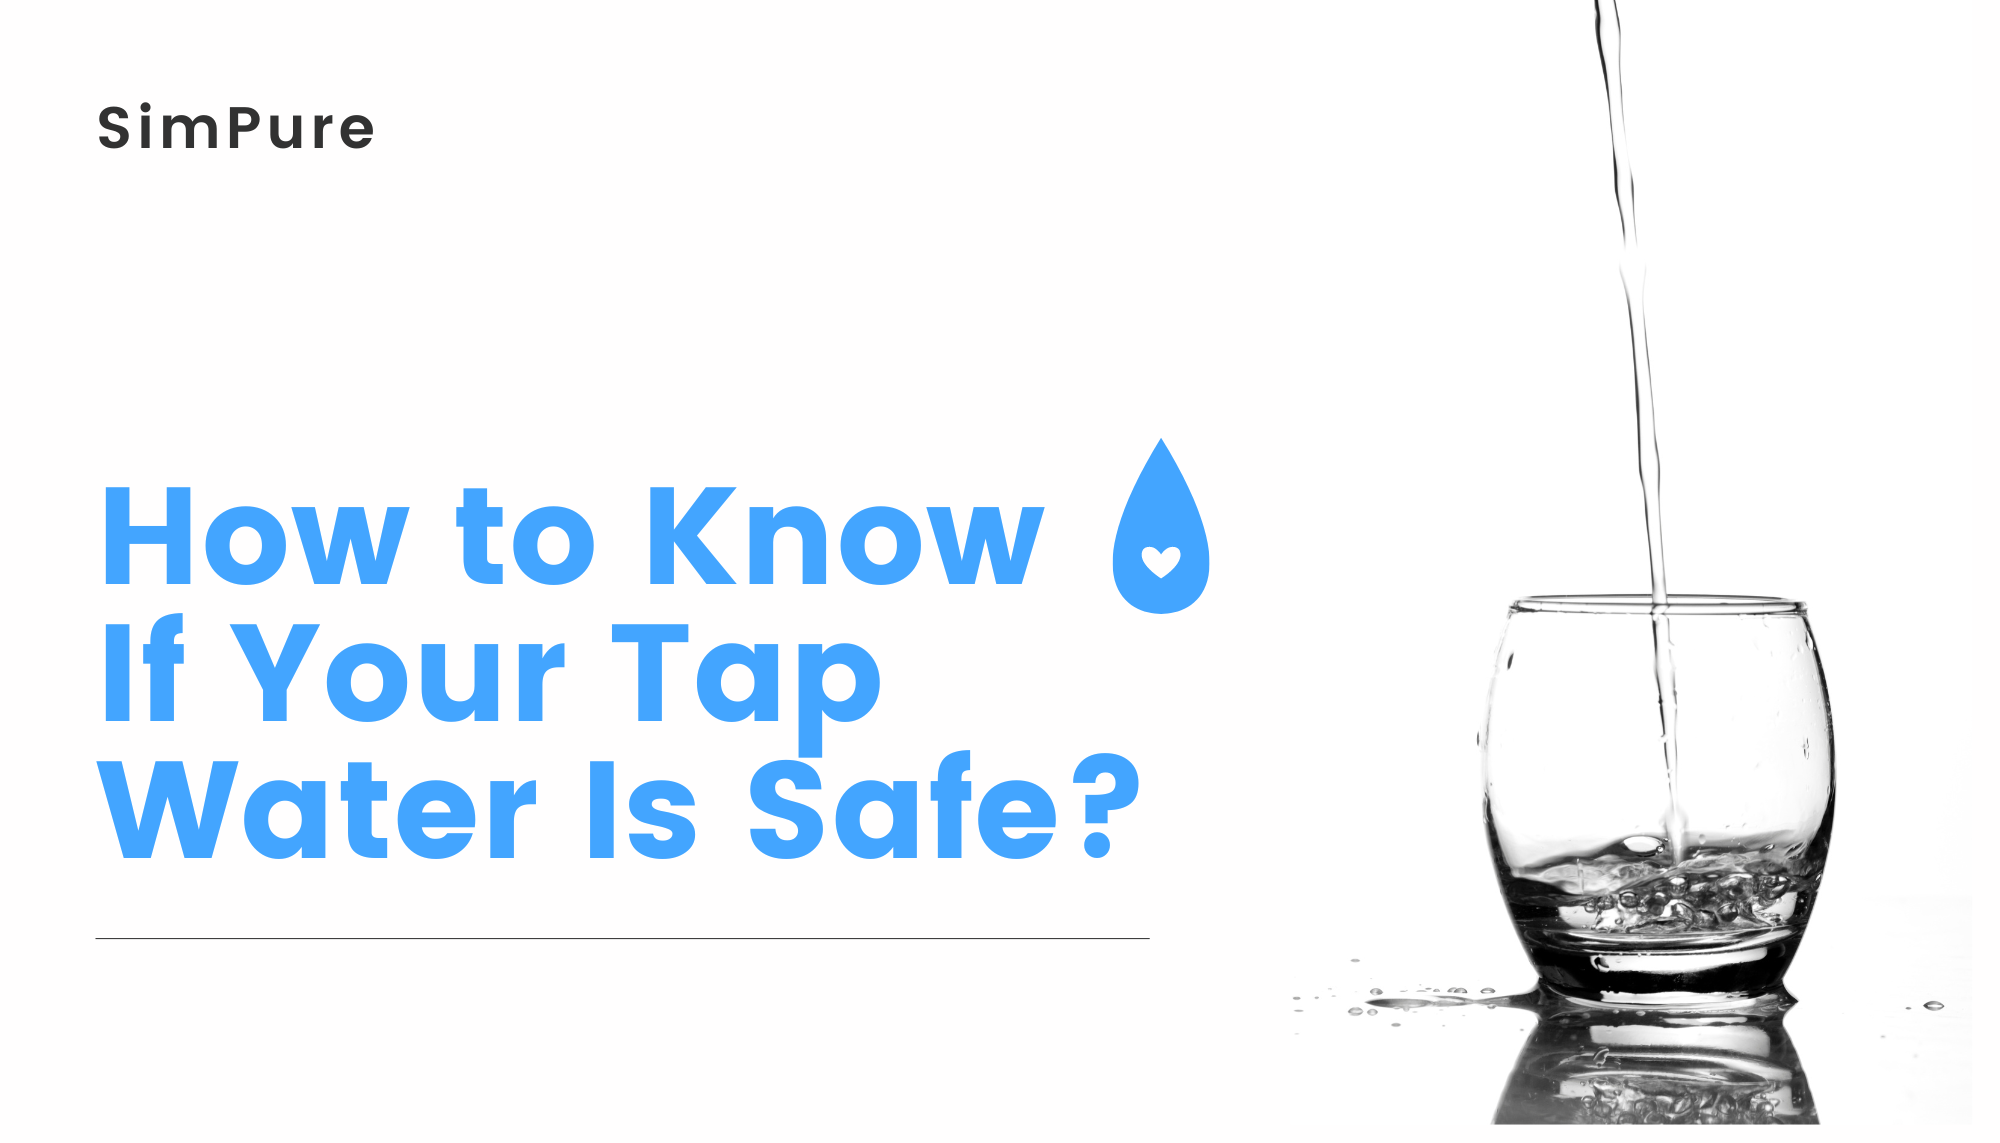 How to know if your tap water is safe